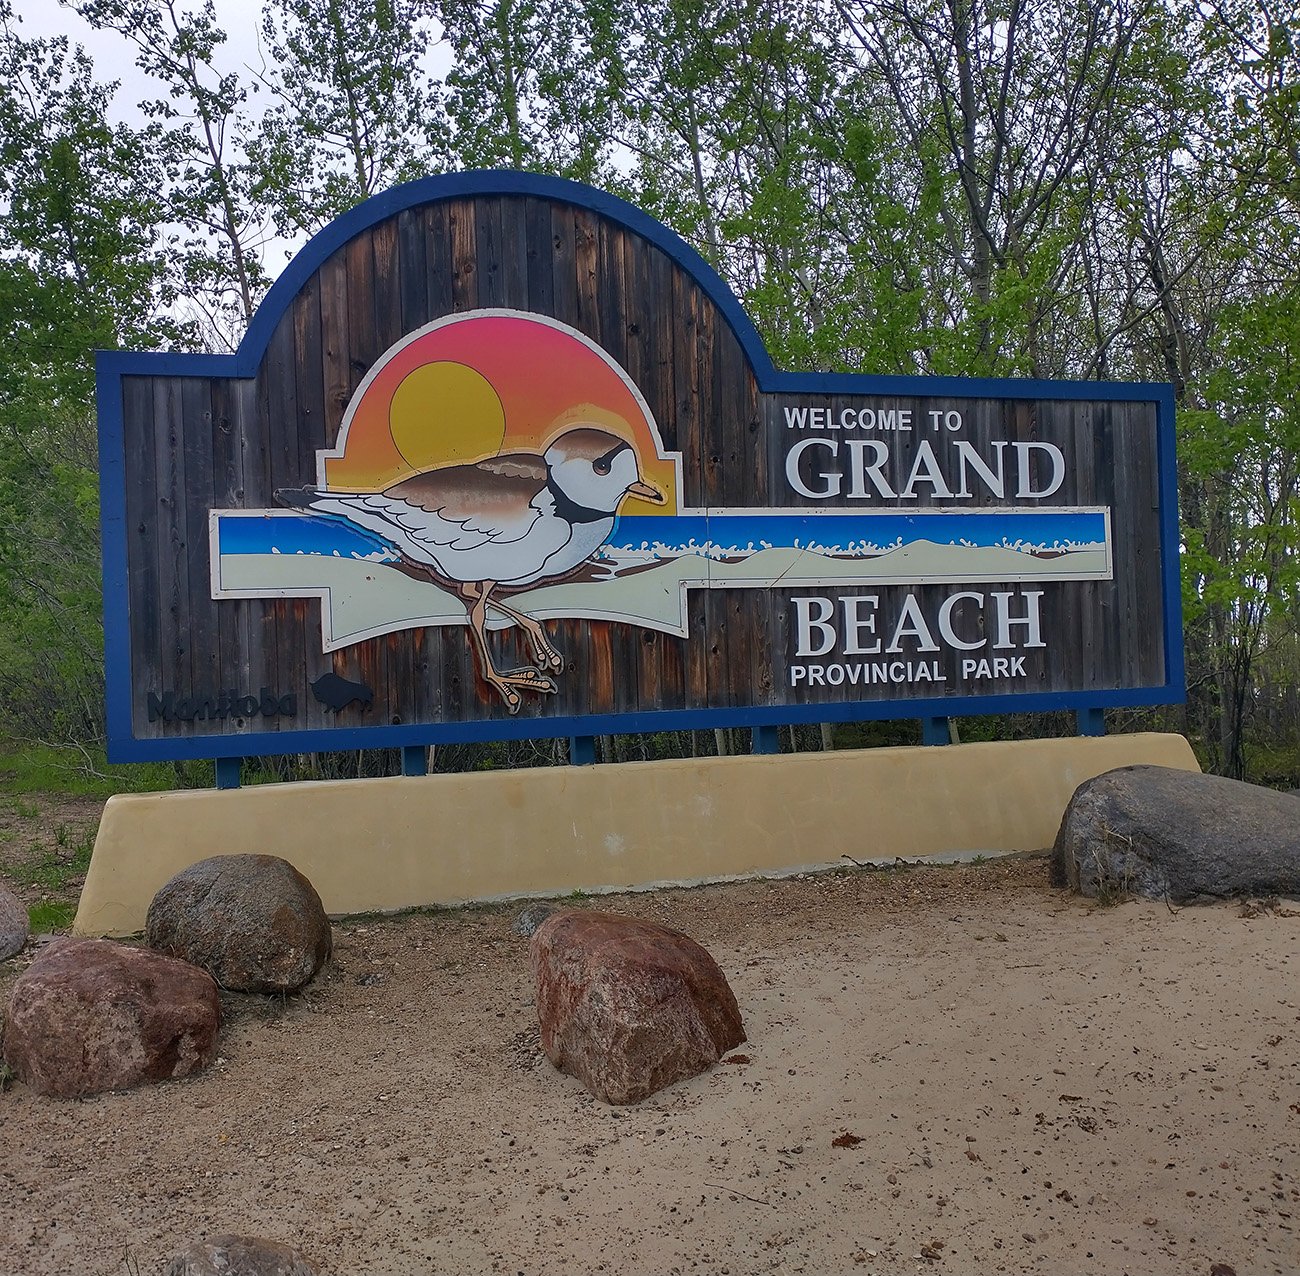 The thing to see there is Grand Beach, which boasts one of Canada's largest sandy beaches. It's kinda far though honestly.